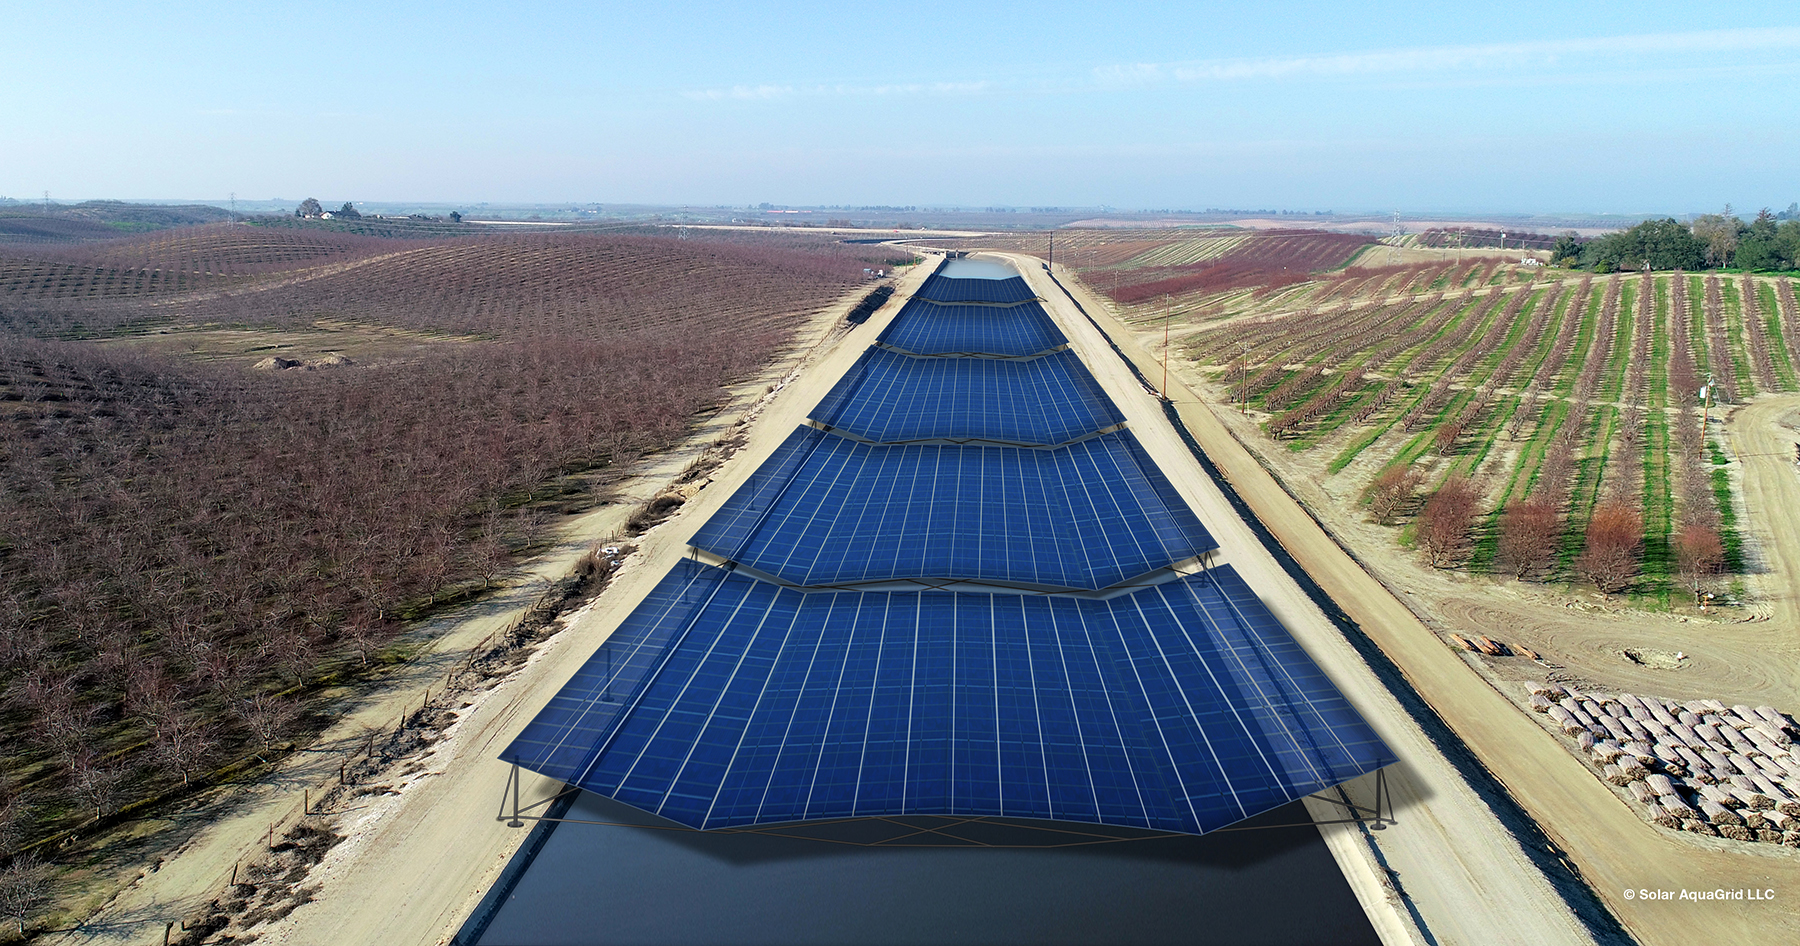 Solar panels over California canals test possible joint-siting benefits